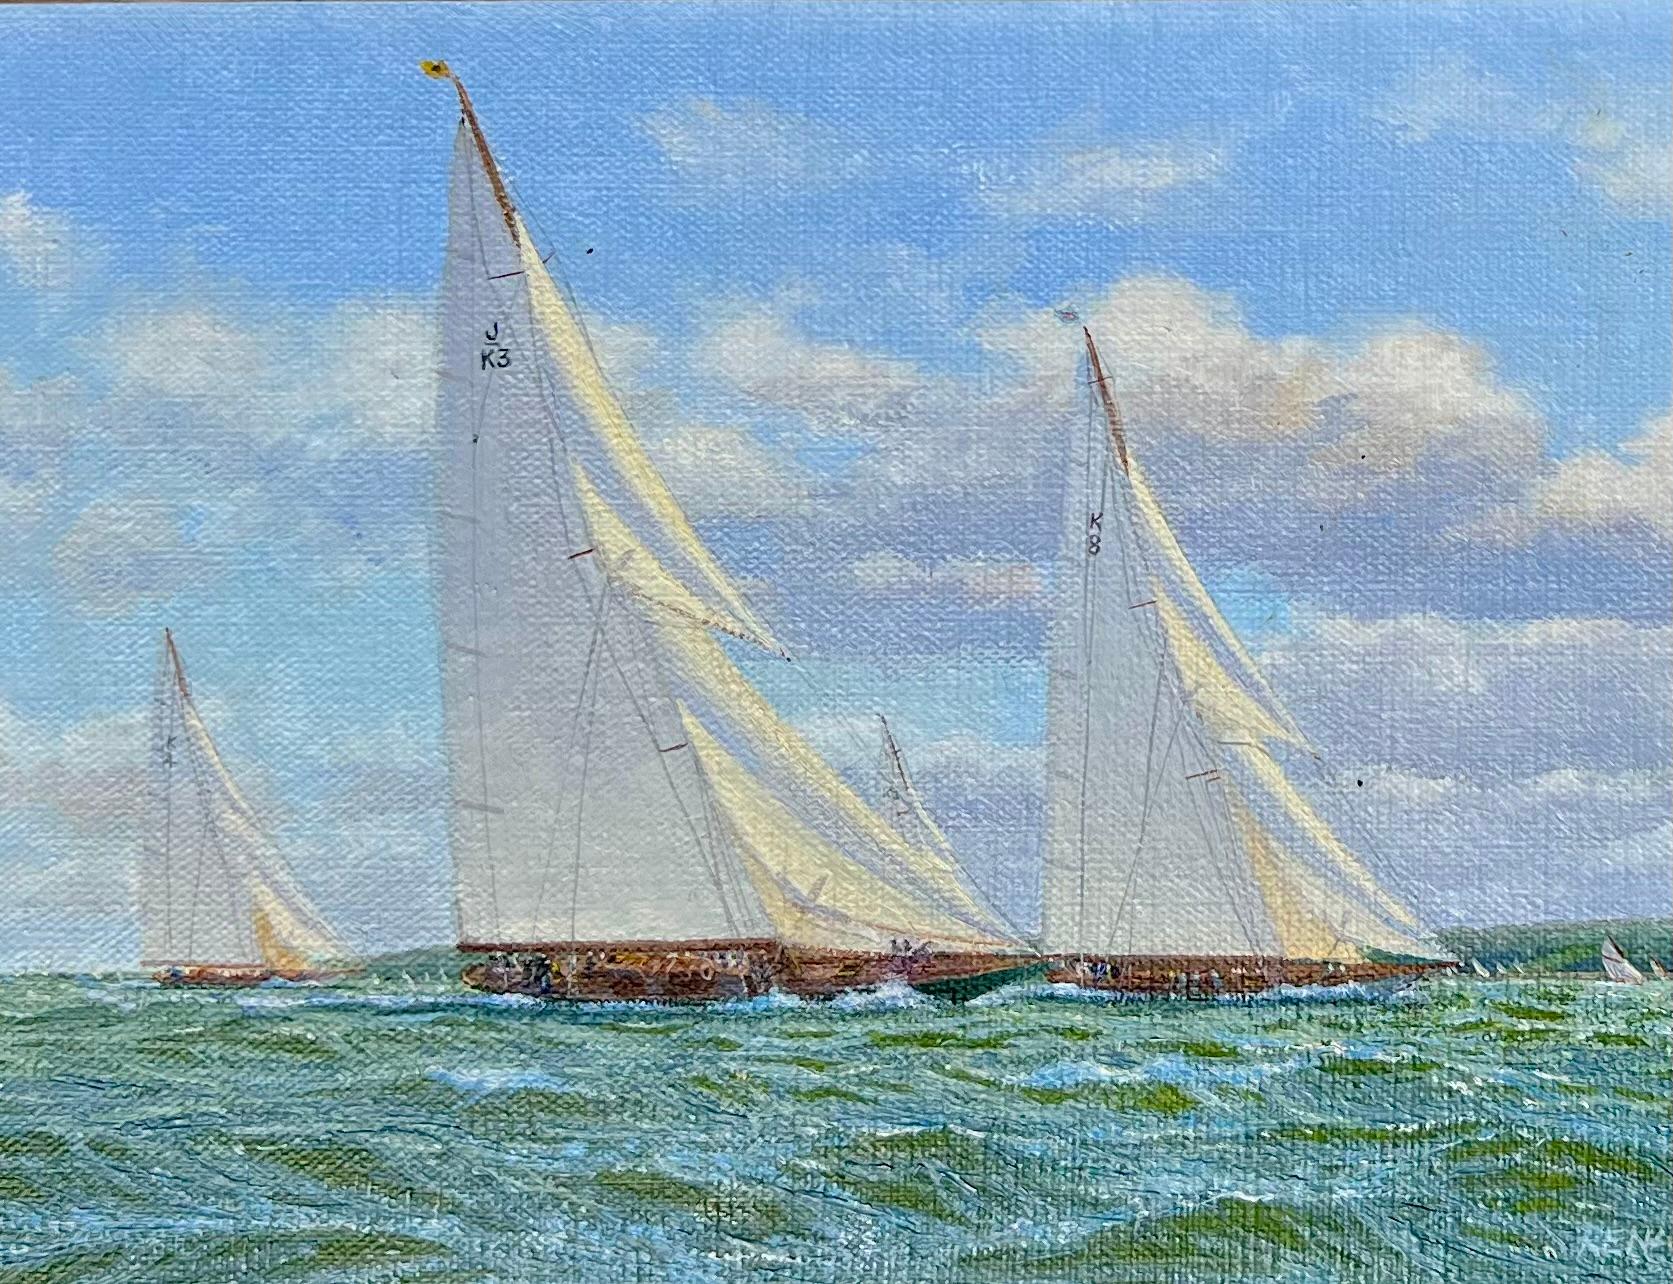 Yachts Racing Off the Coast - Painting by Stephen J Renard